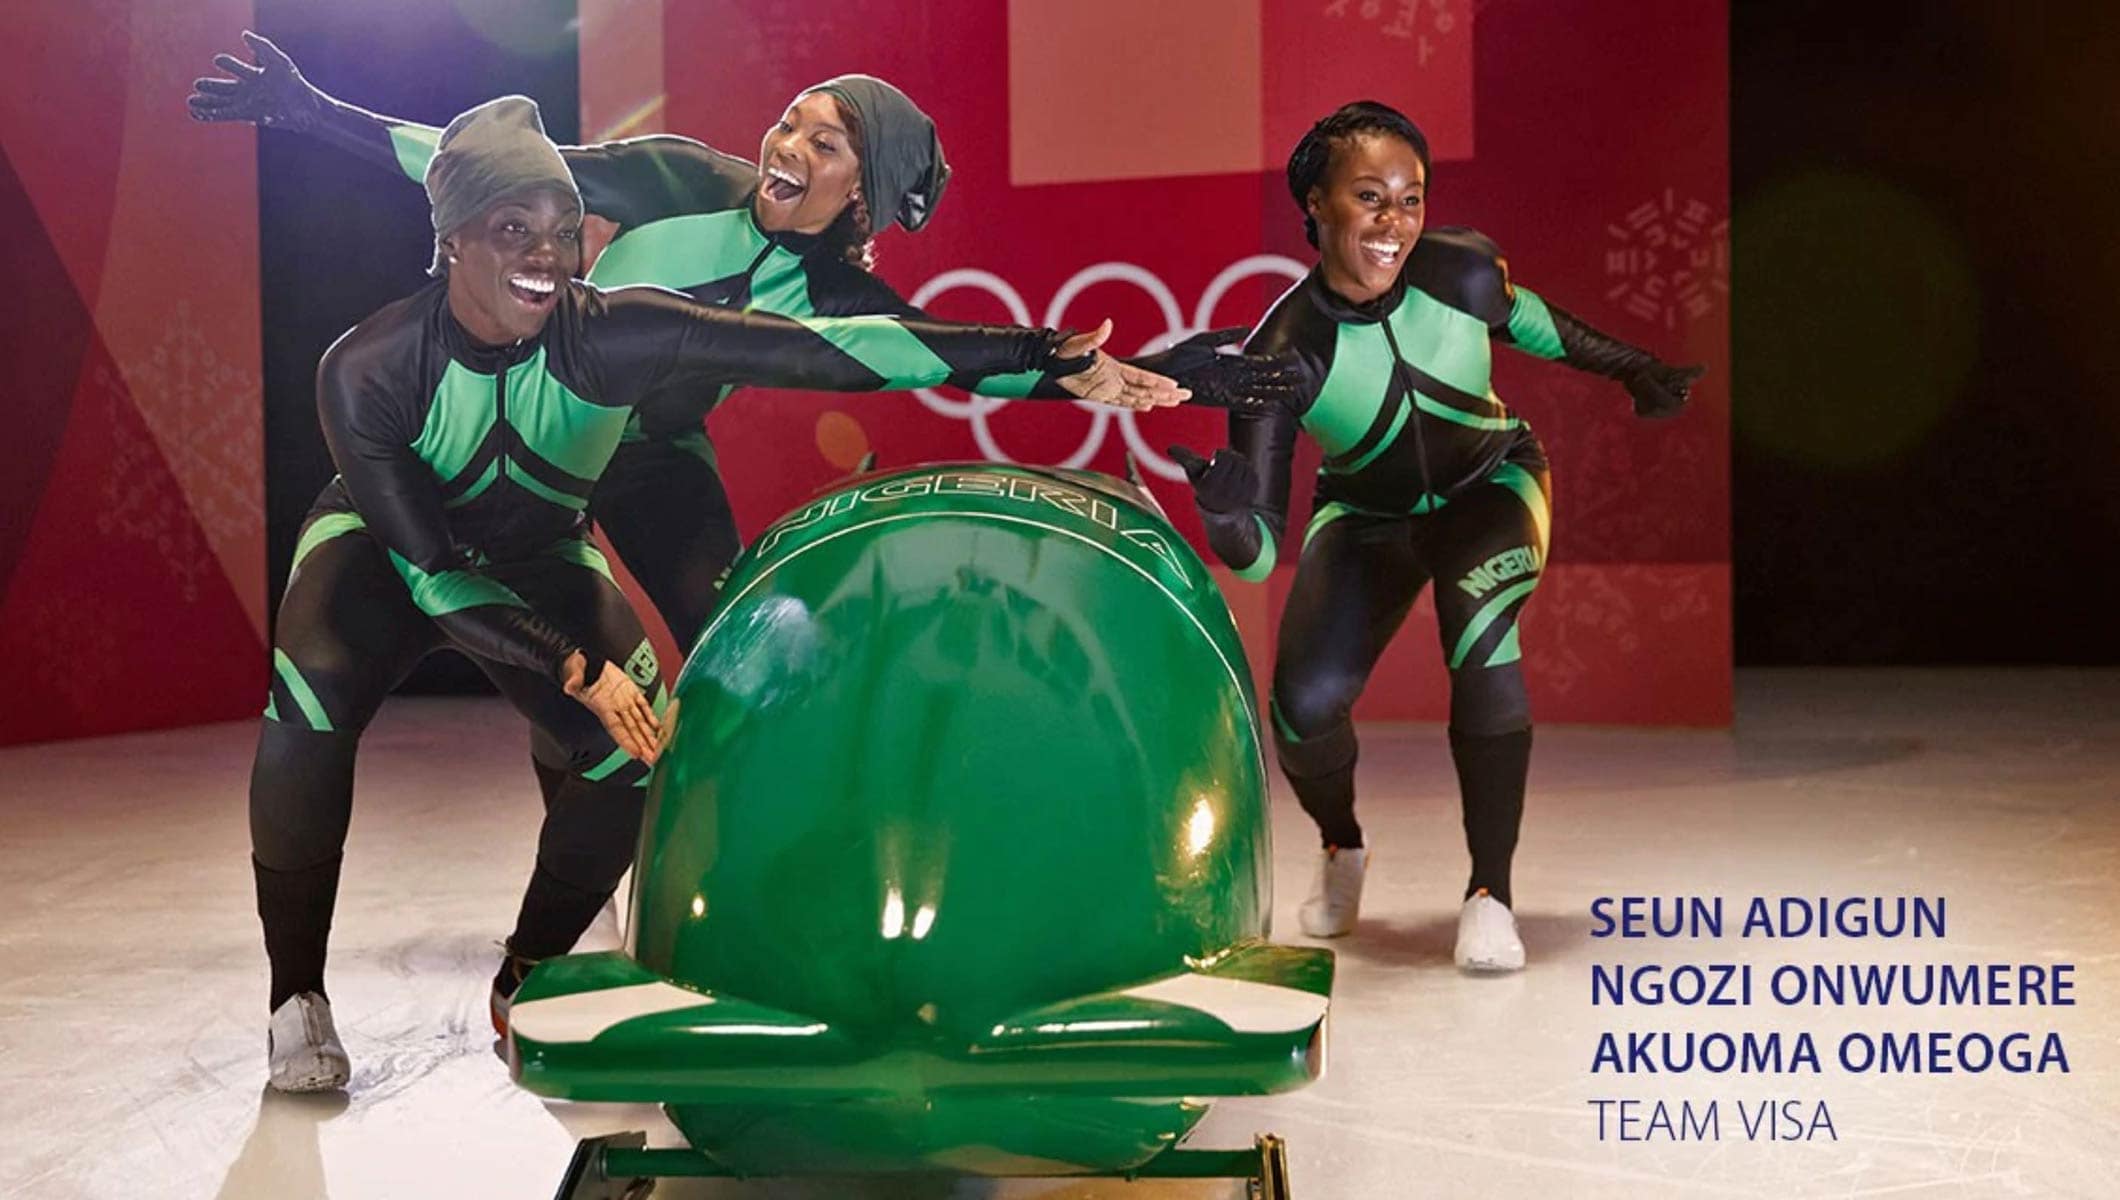 Nigerian Women’s Bobsleigh Team joins Team Visa for the Olympic Winter Games PyeongChang 2018